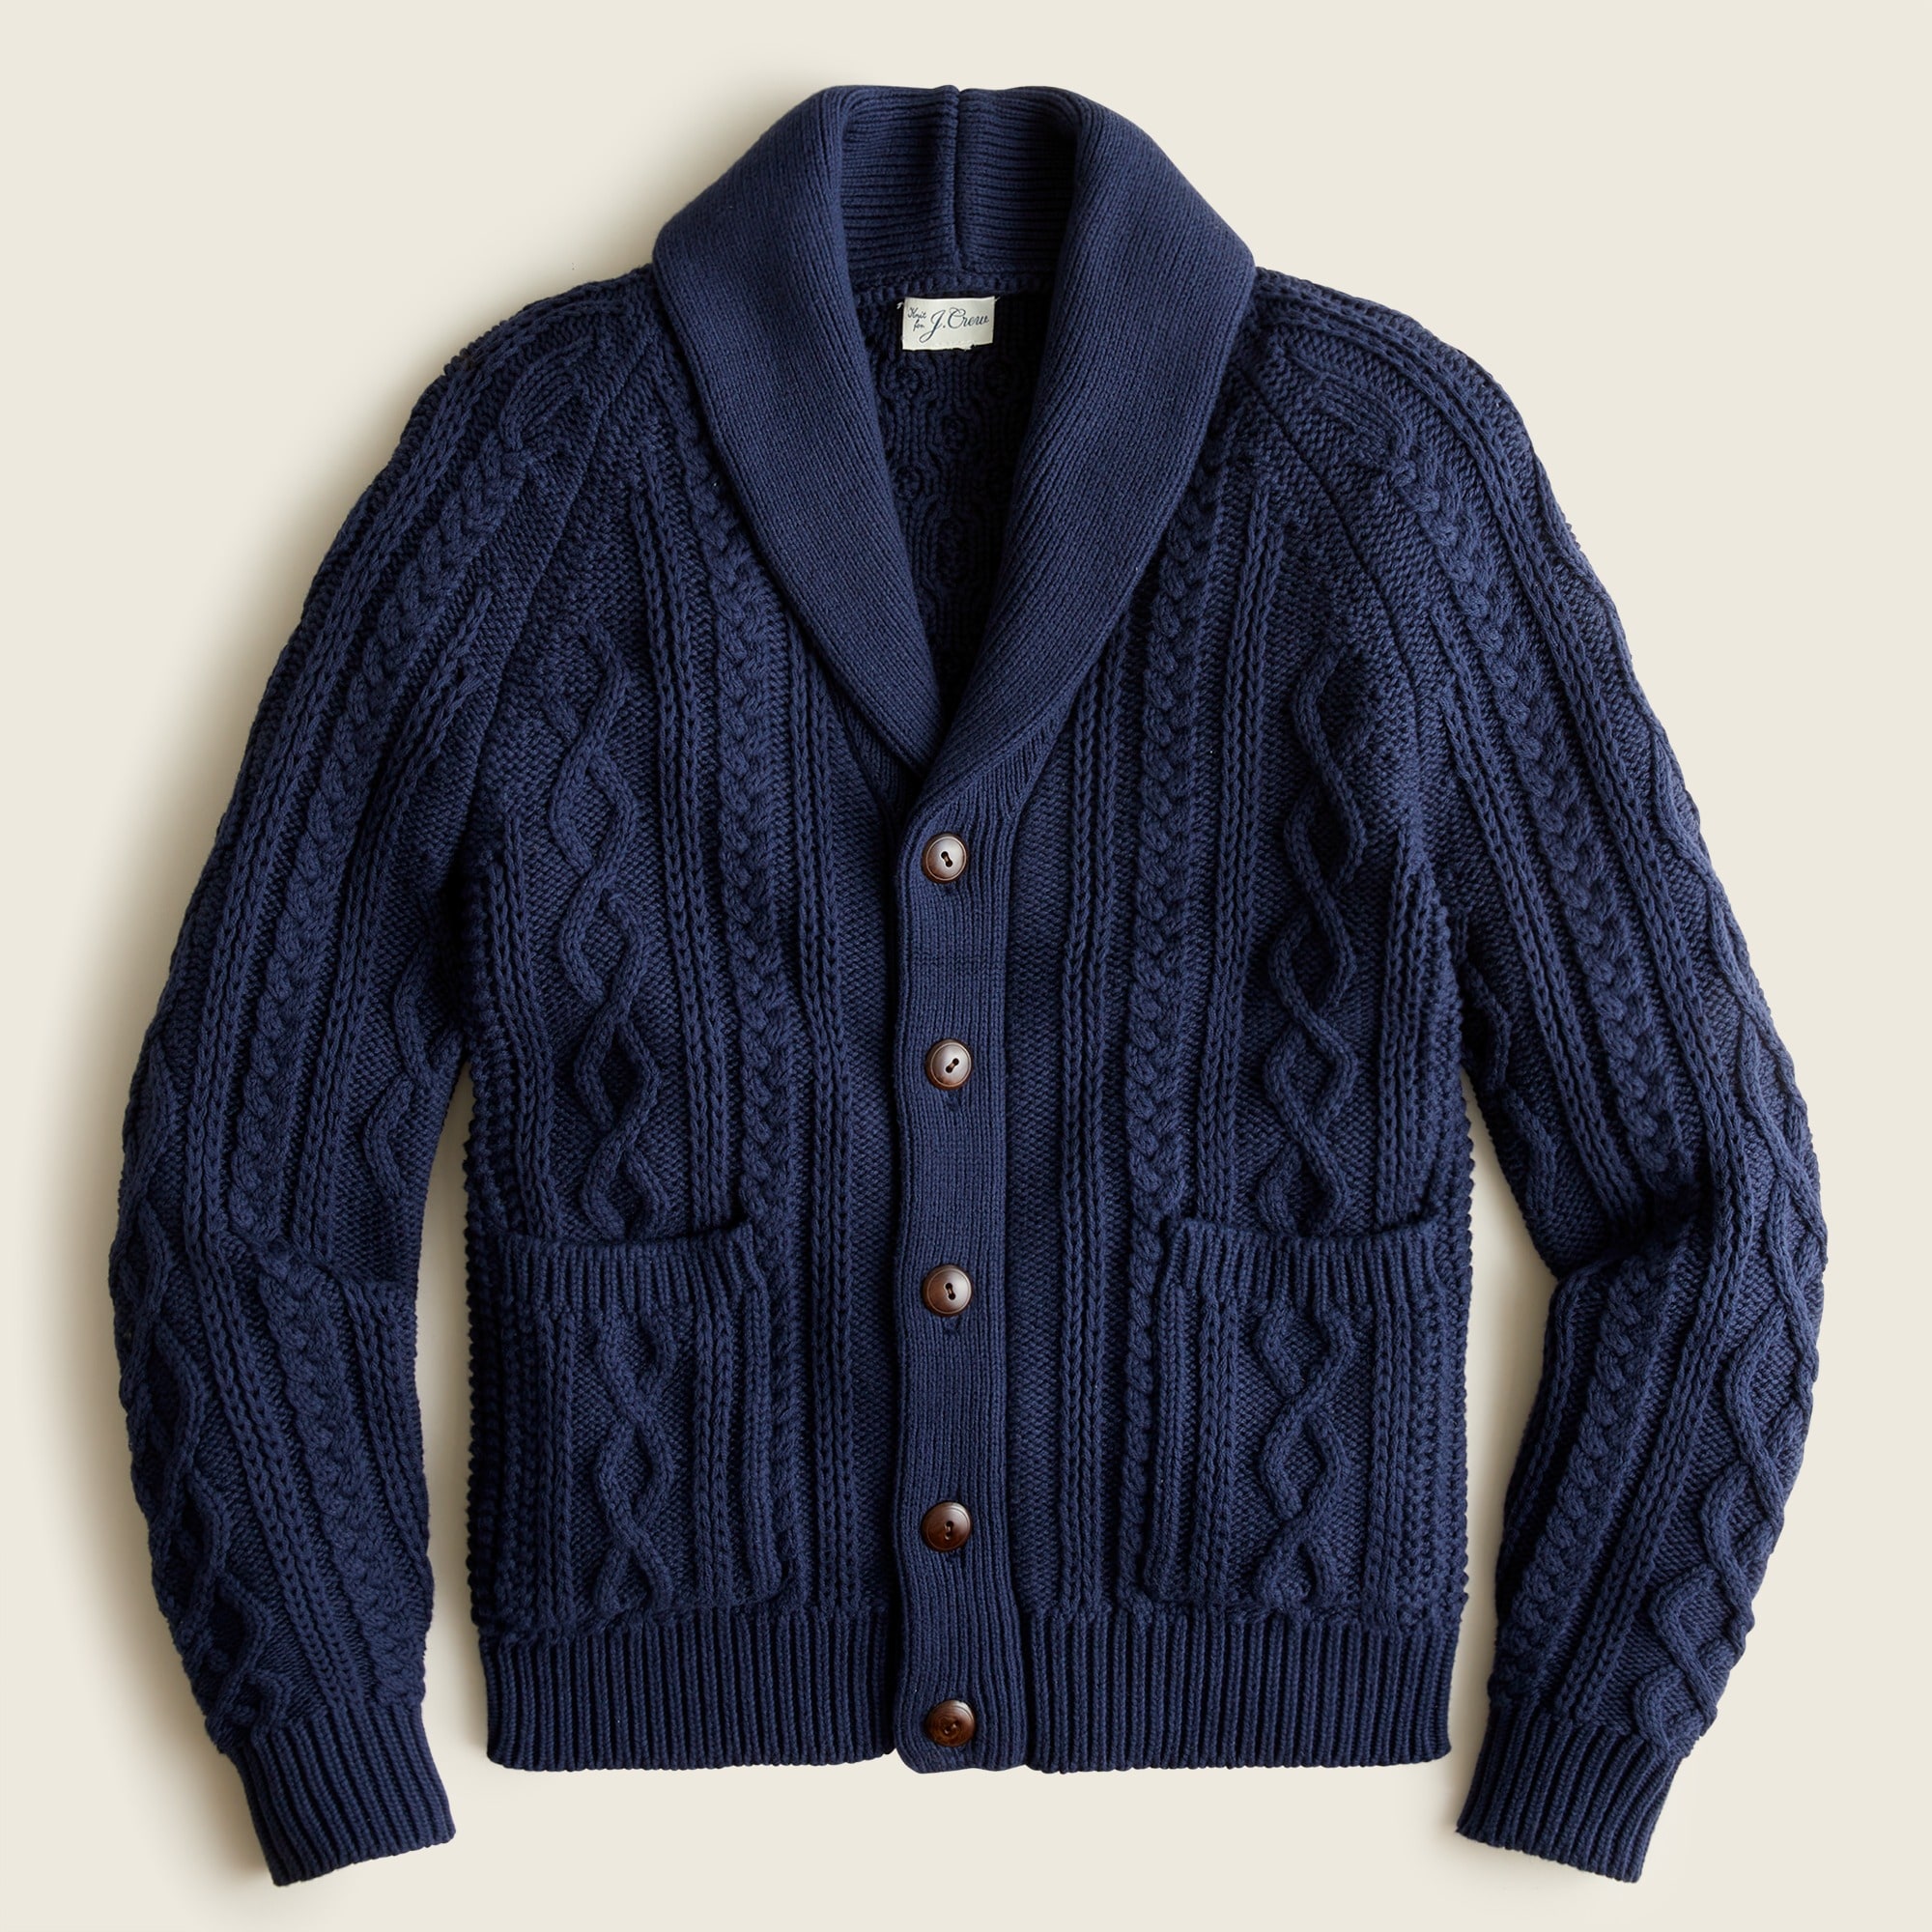 J.Crew: Cotton Cable-knit Shawl Cardigan Sweater For Men